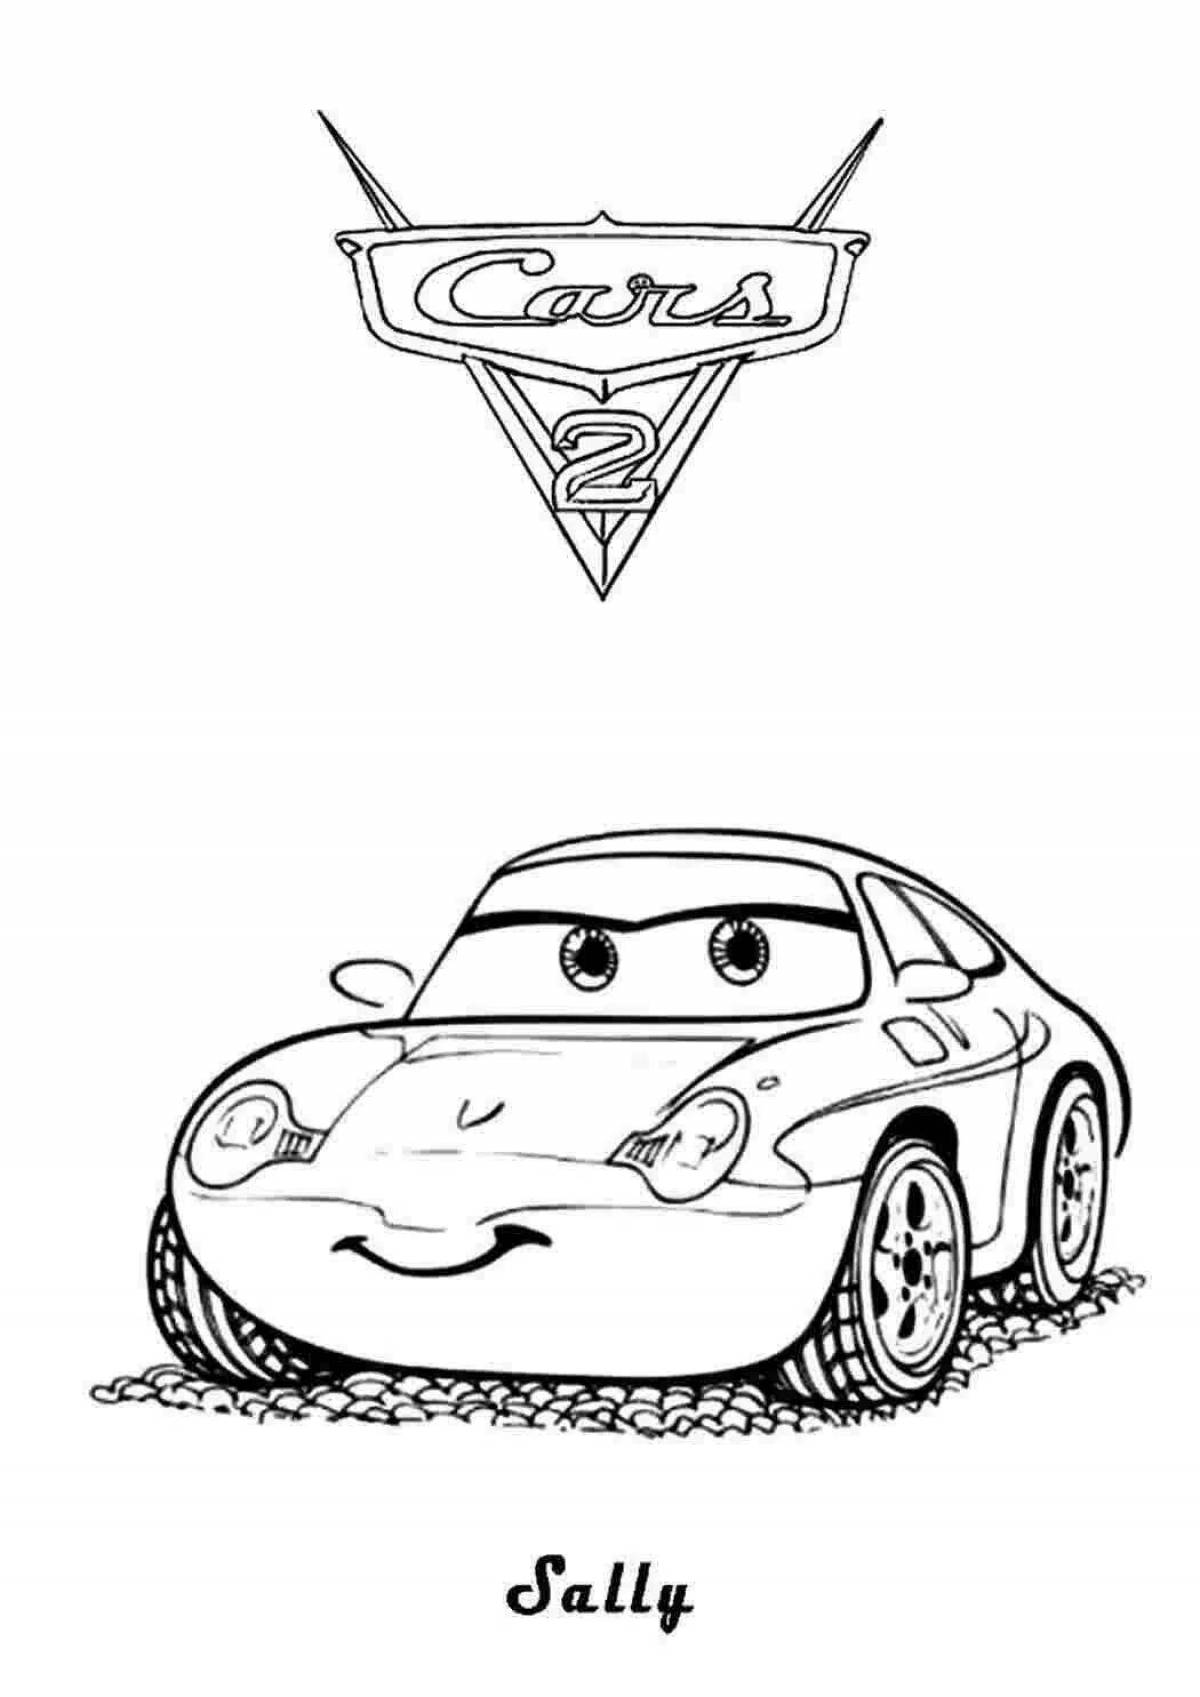 Sally's wonderful cars coloring page